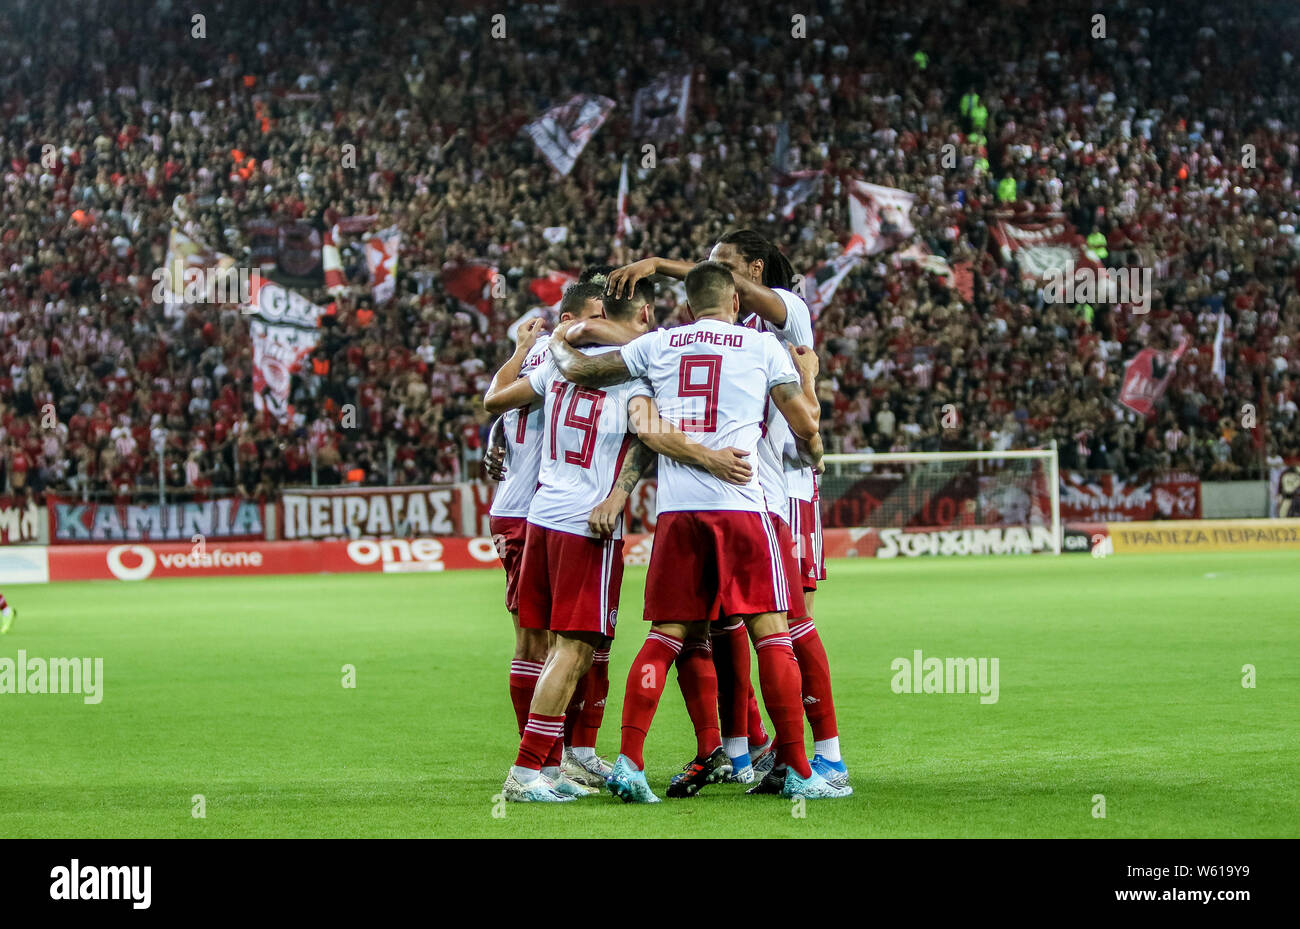 190731) -- PIRAEUS, July 31, 2019 (Xinhua) -- Players of Olympiacos  celebrate after scoring during the second leg of second qualifying round  match of UEFA Champions League between Olympiacos of Greece and